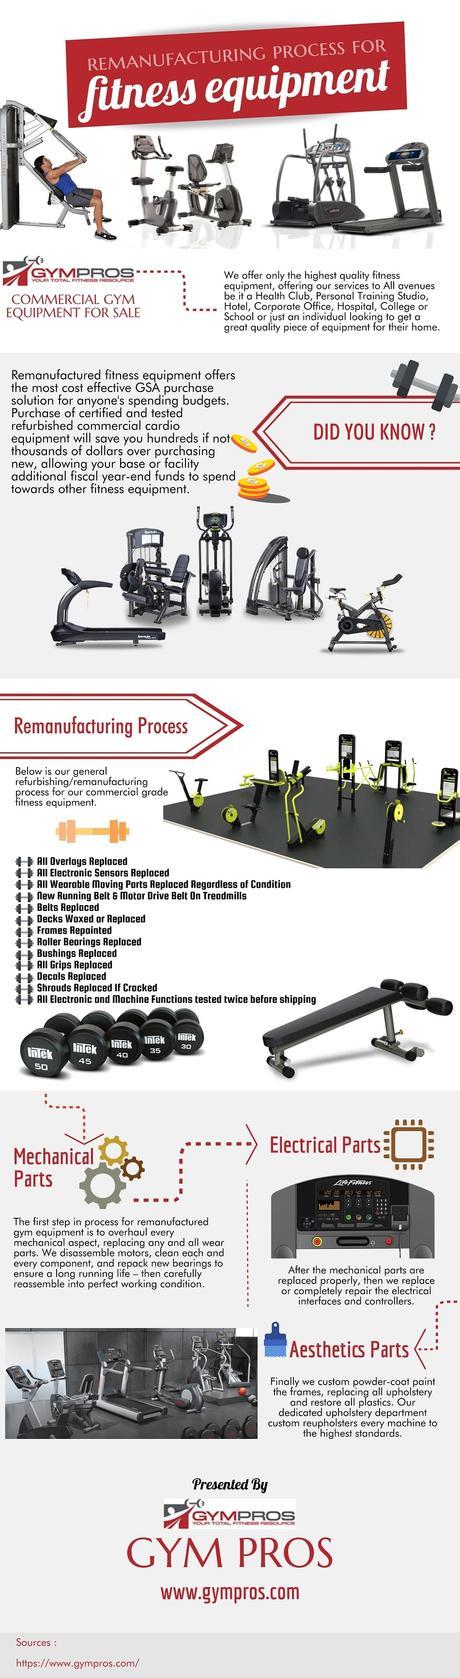 Remanufacturing Process for Fitness Equipment